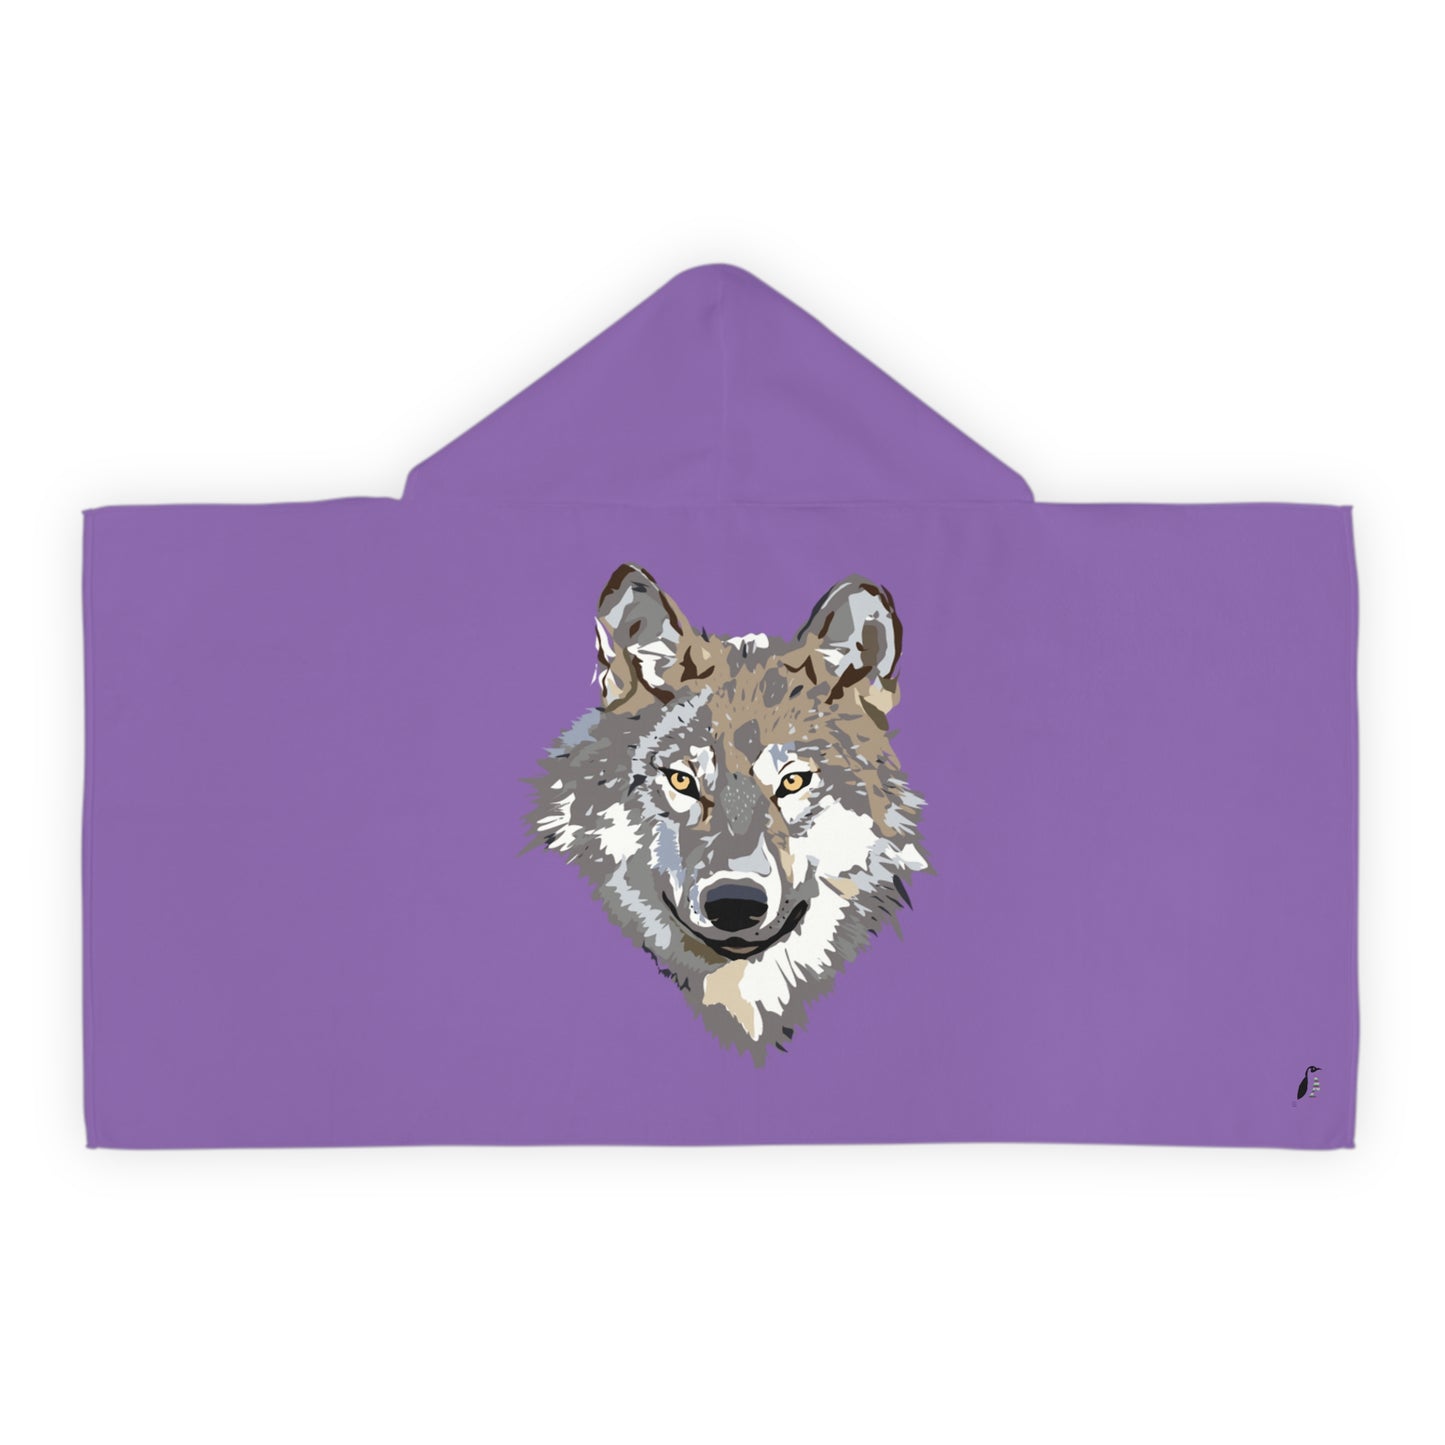 Youth Hooded Towel: Wolves Lite Purple